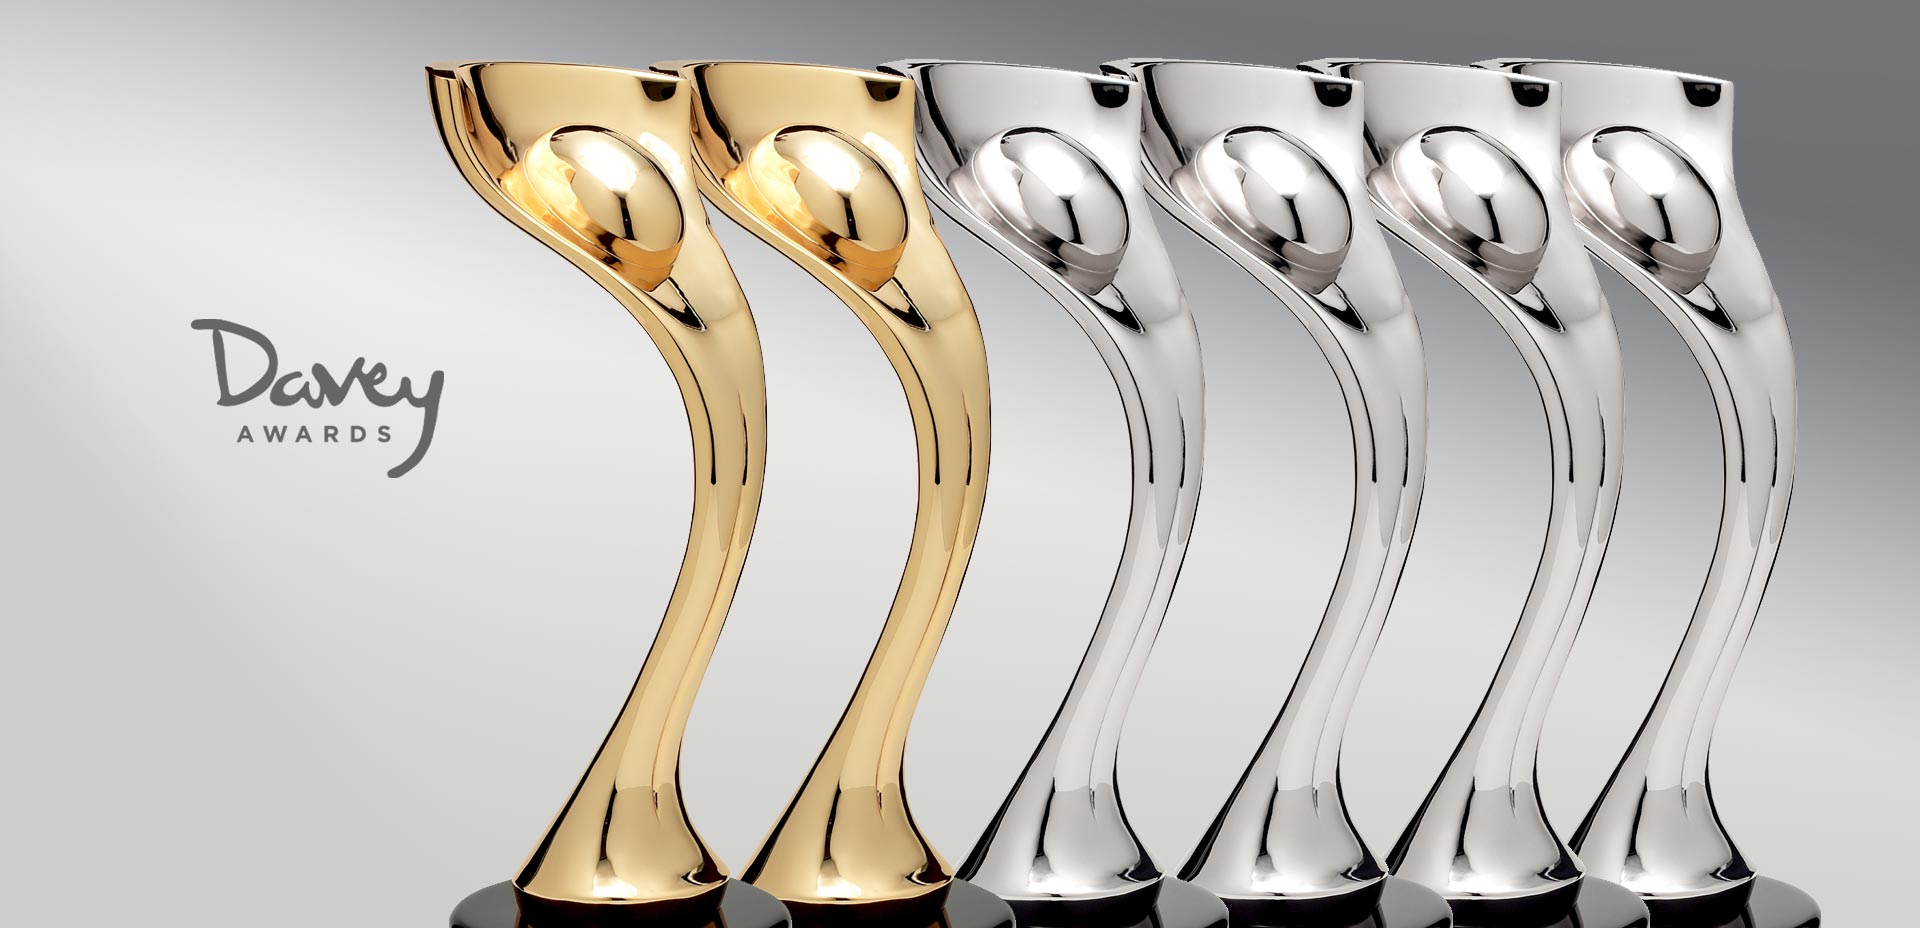 Nucleus wins an array of silvers in the Davey Awards